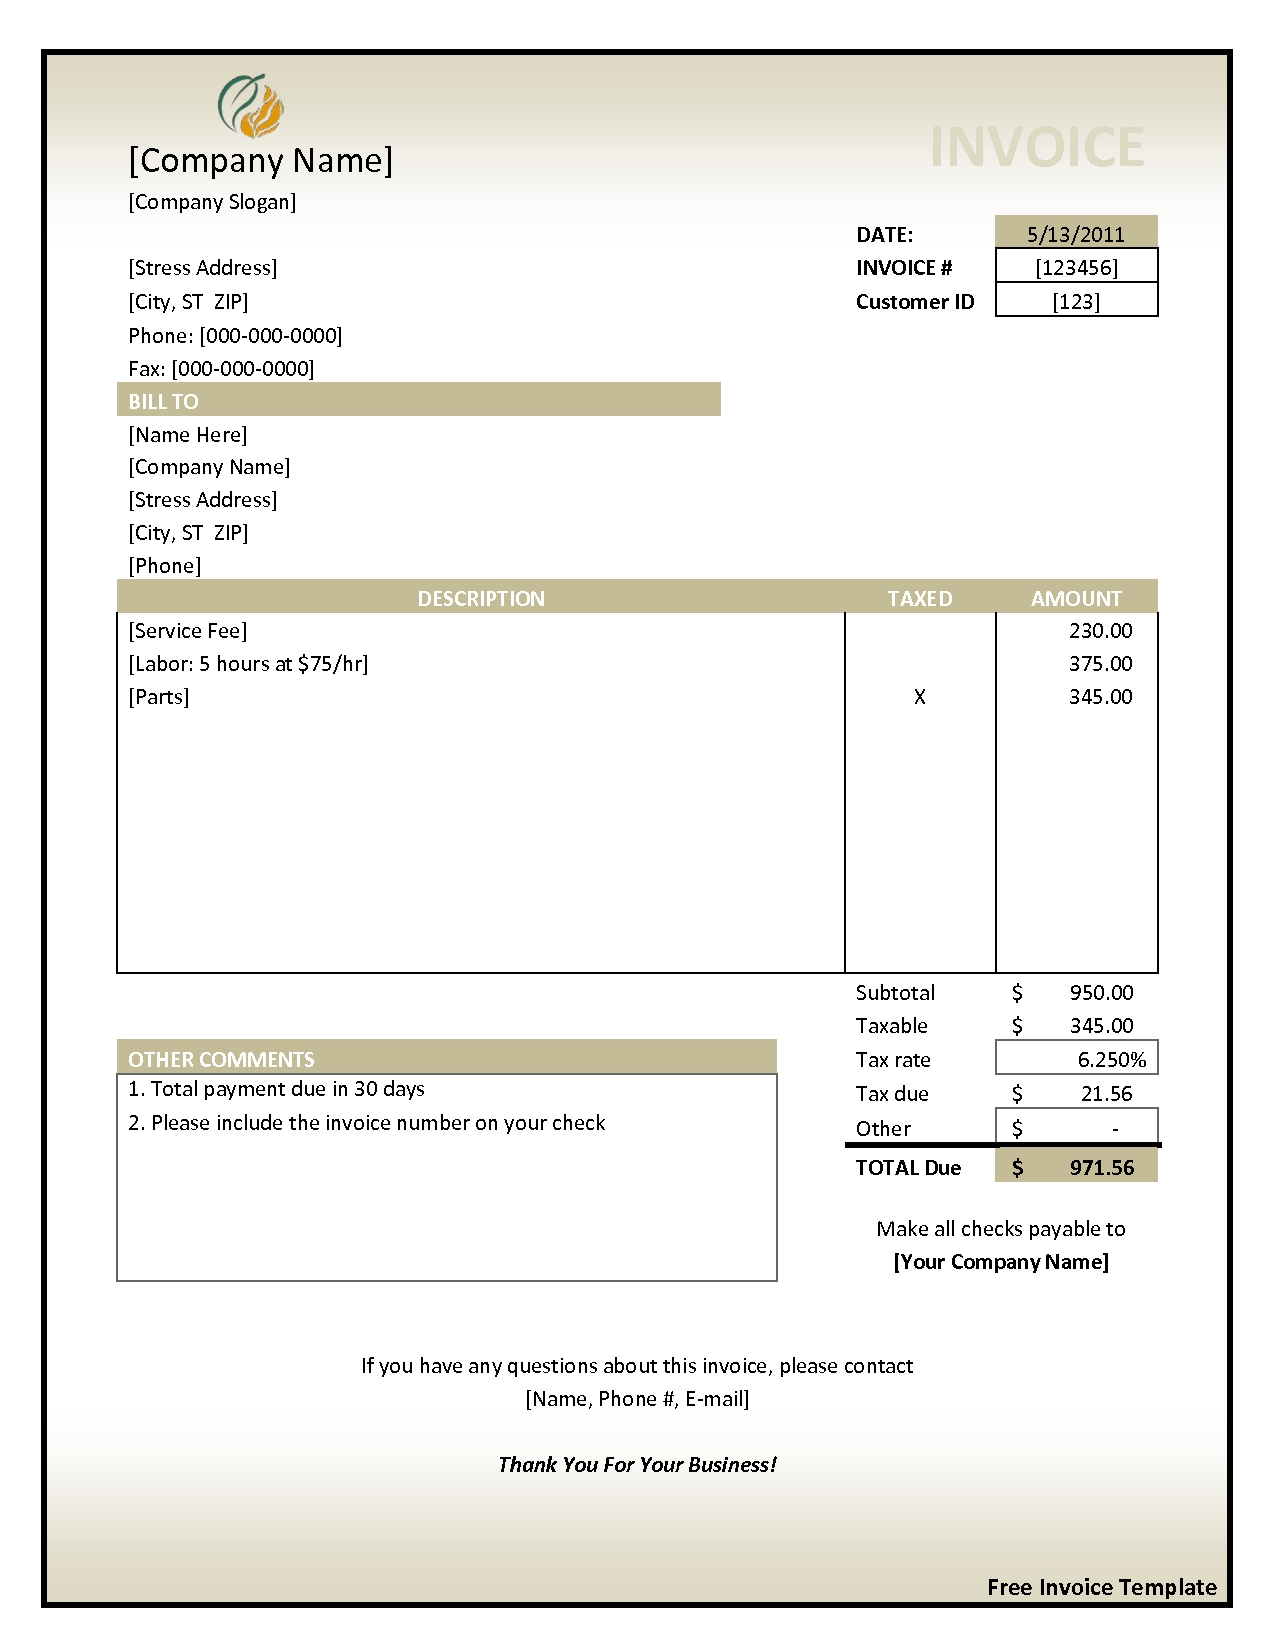 download free invoice template free business template download invoice free